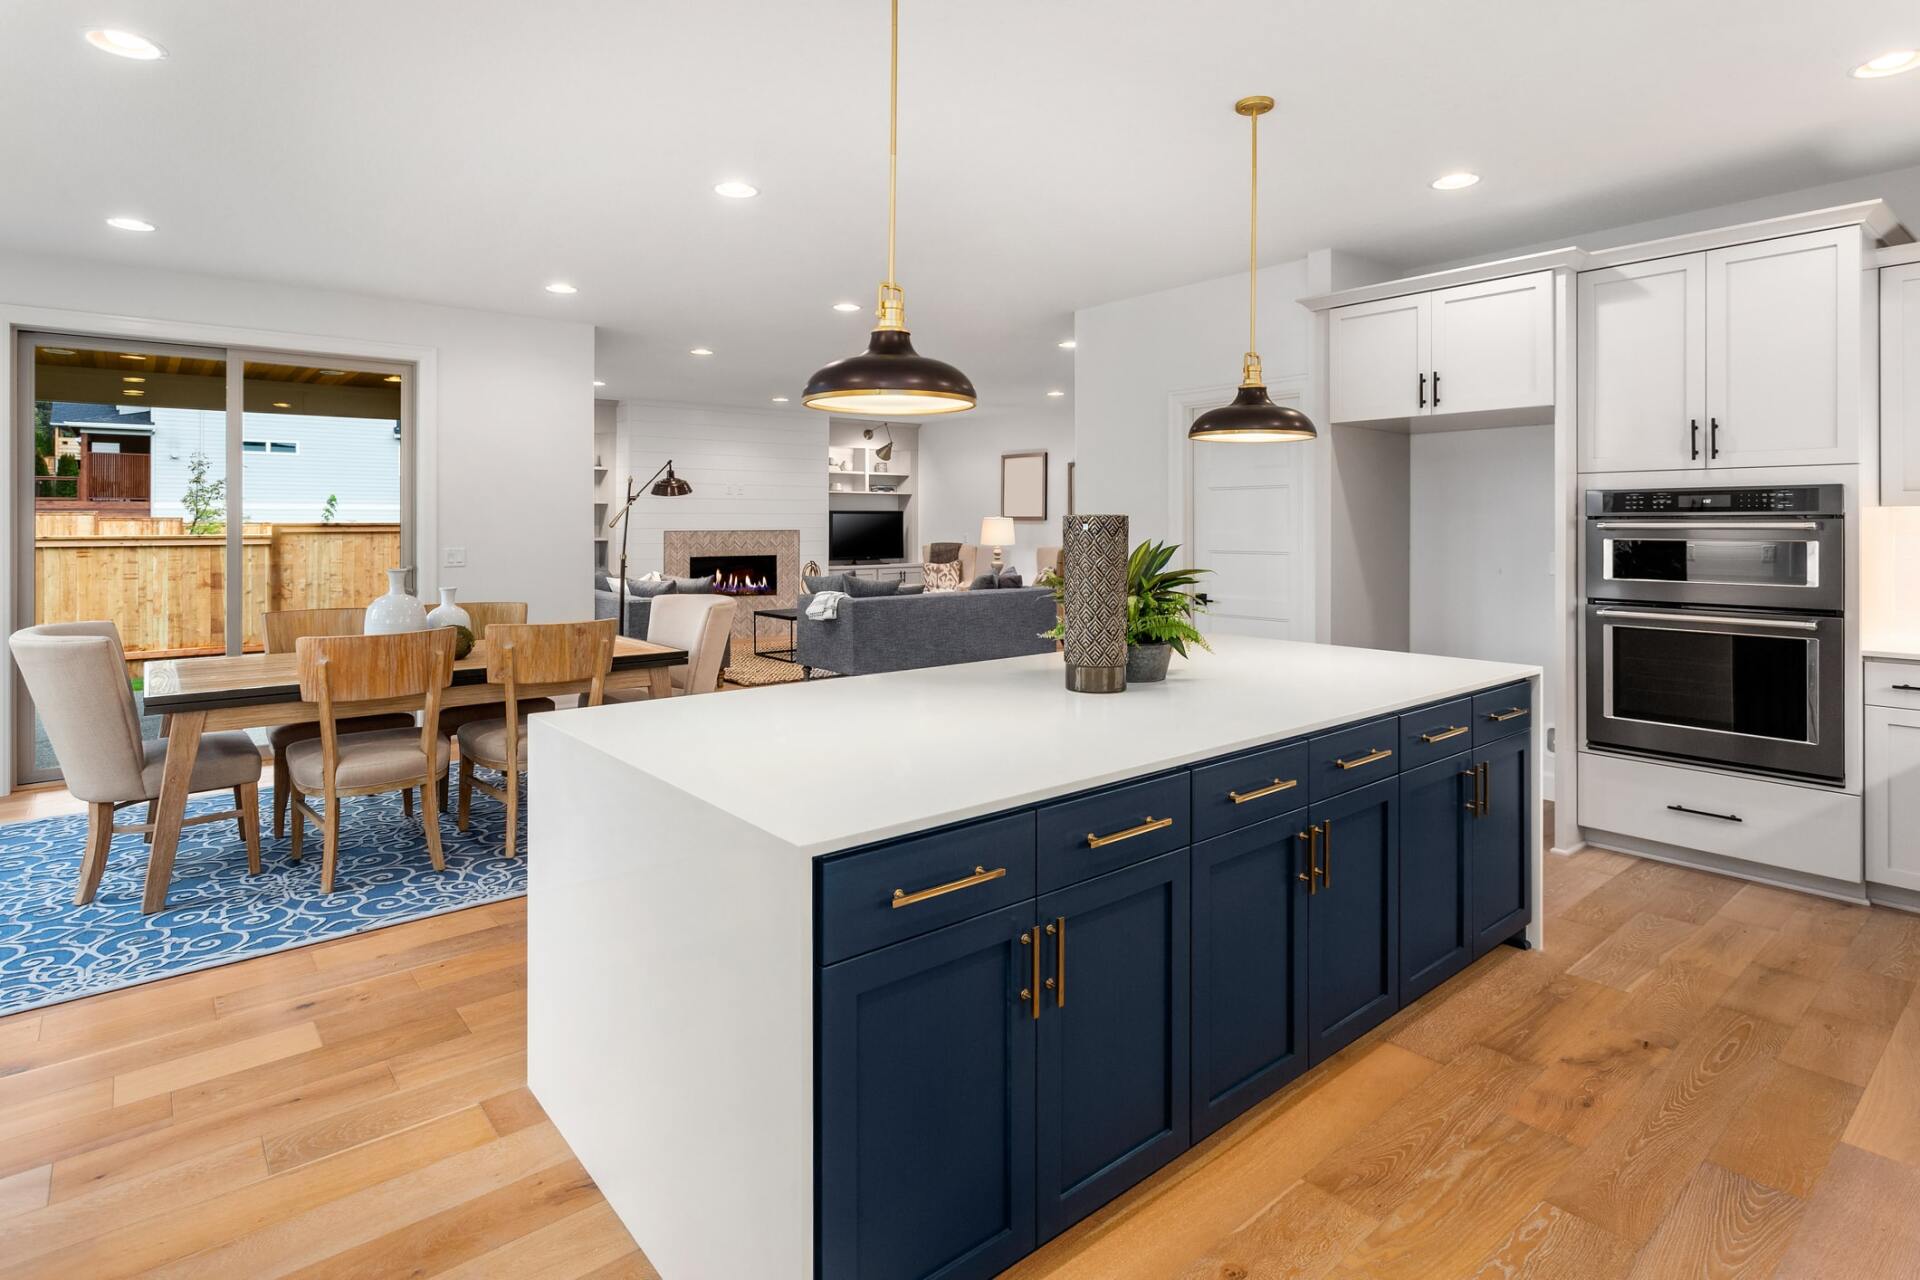 custom kitchen remodel with kitchen island and white and blue cabinets